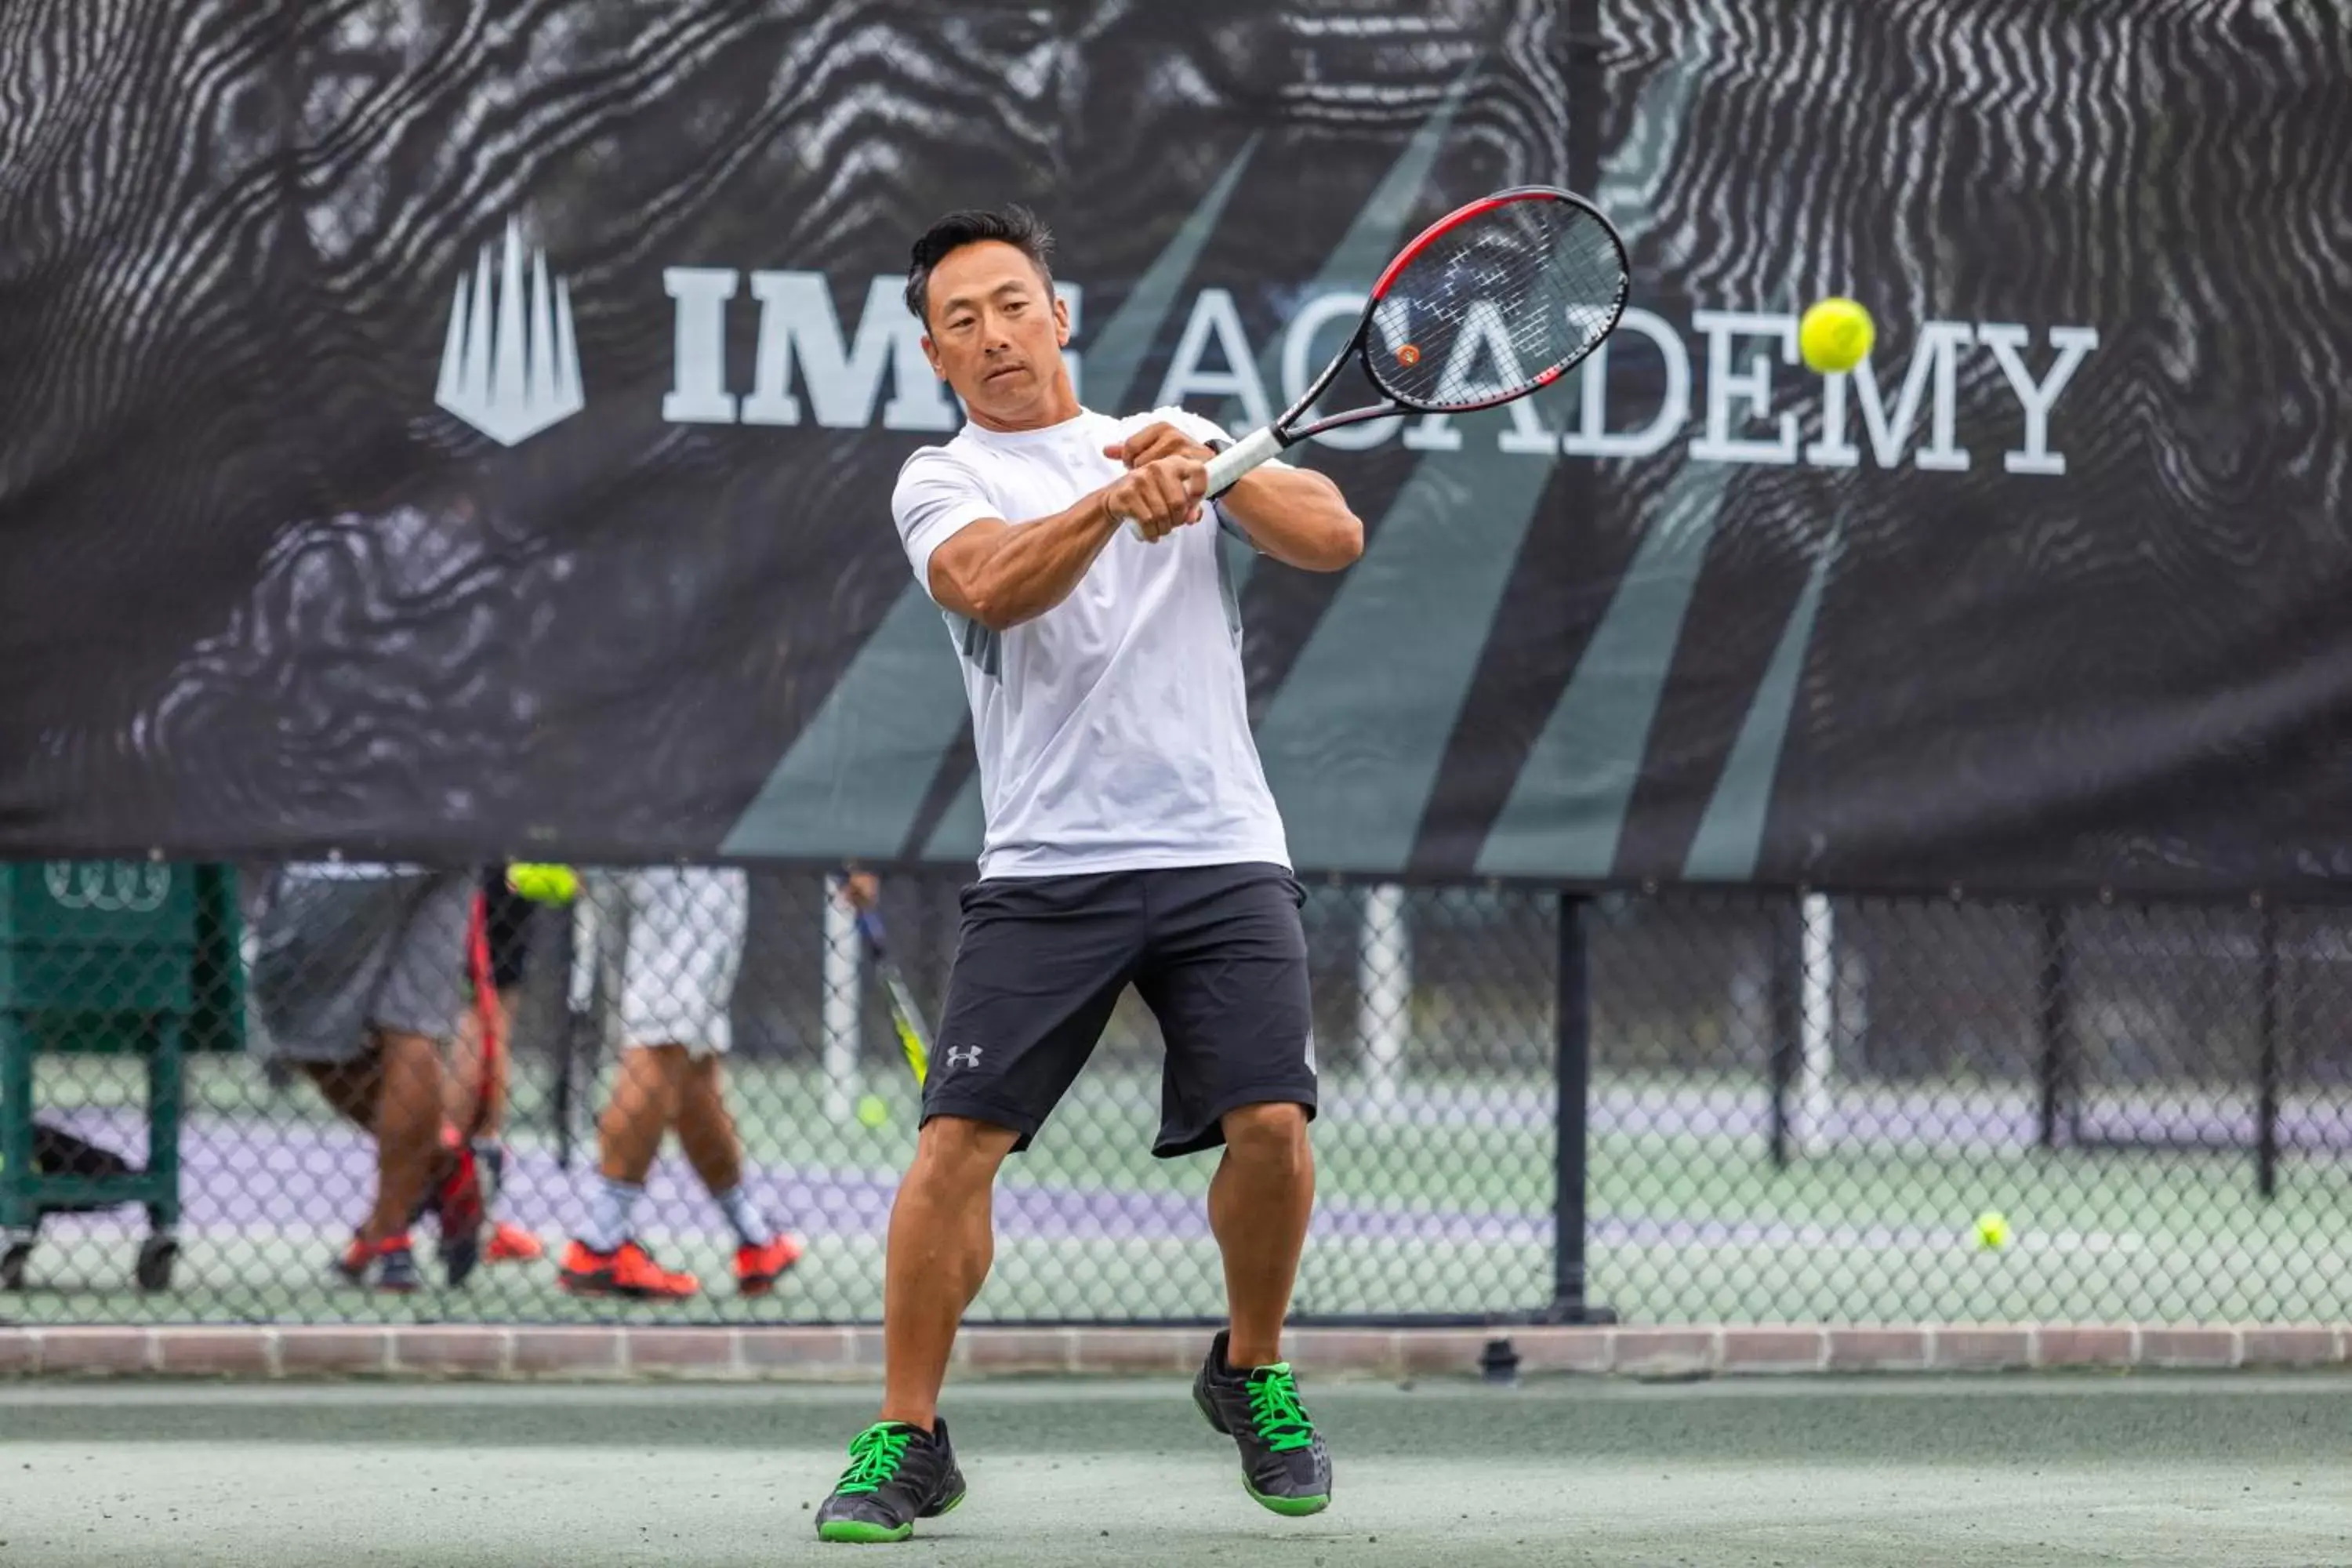 Tennis court, Other Activities in Legacy Hotel at IMG Academy